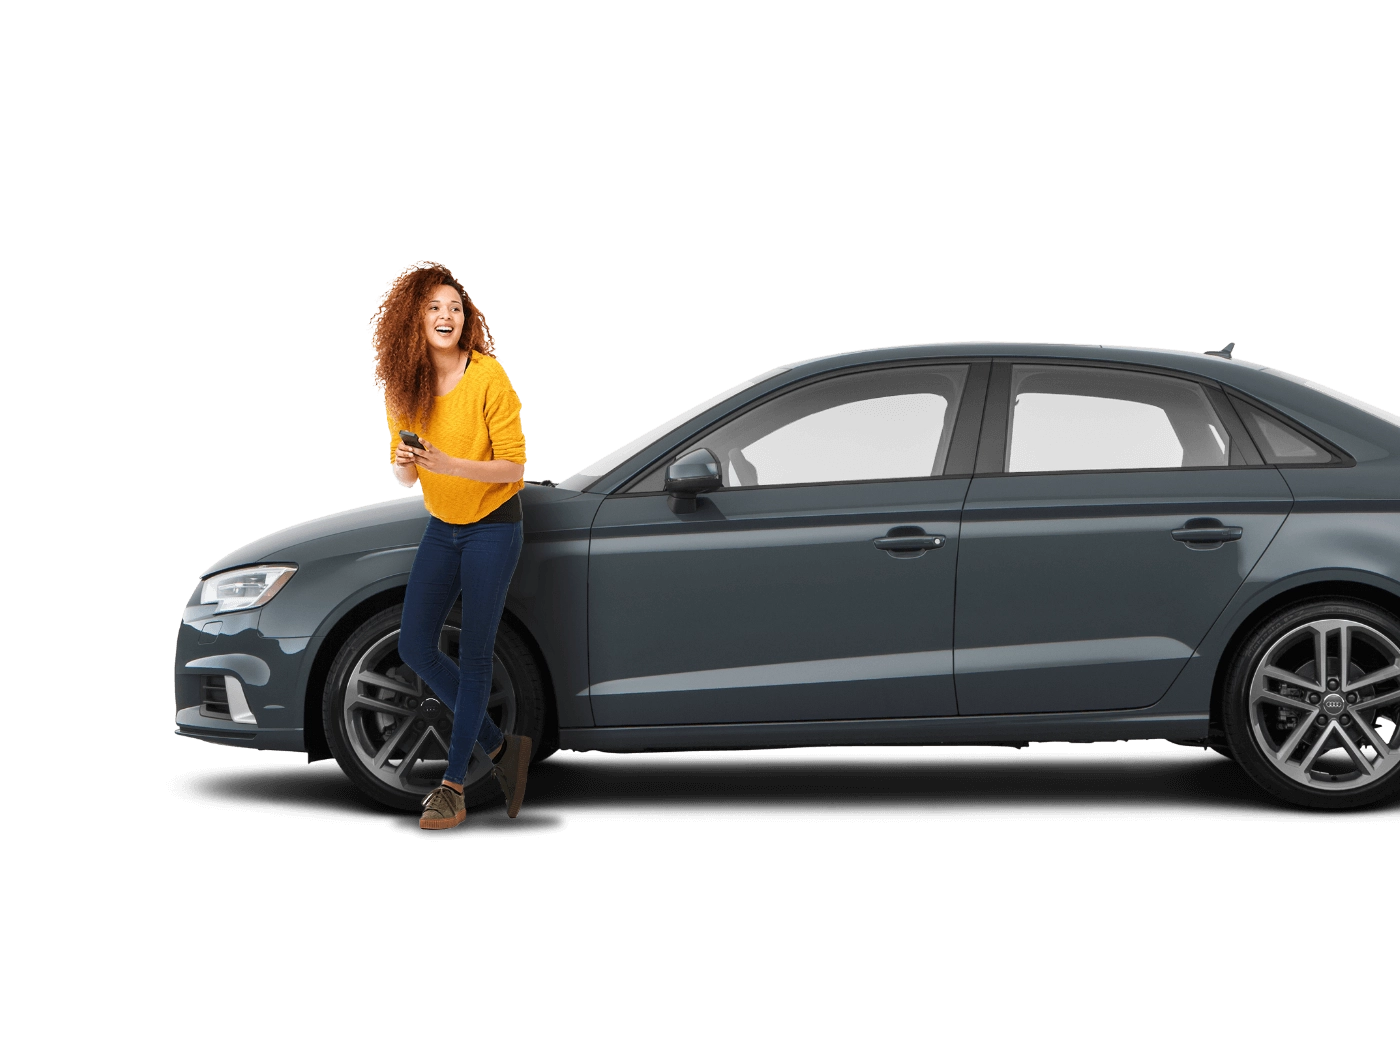 Shop used cars and compare car finance, all online